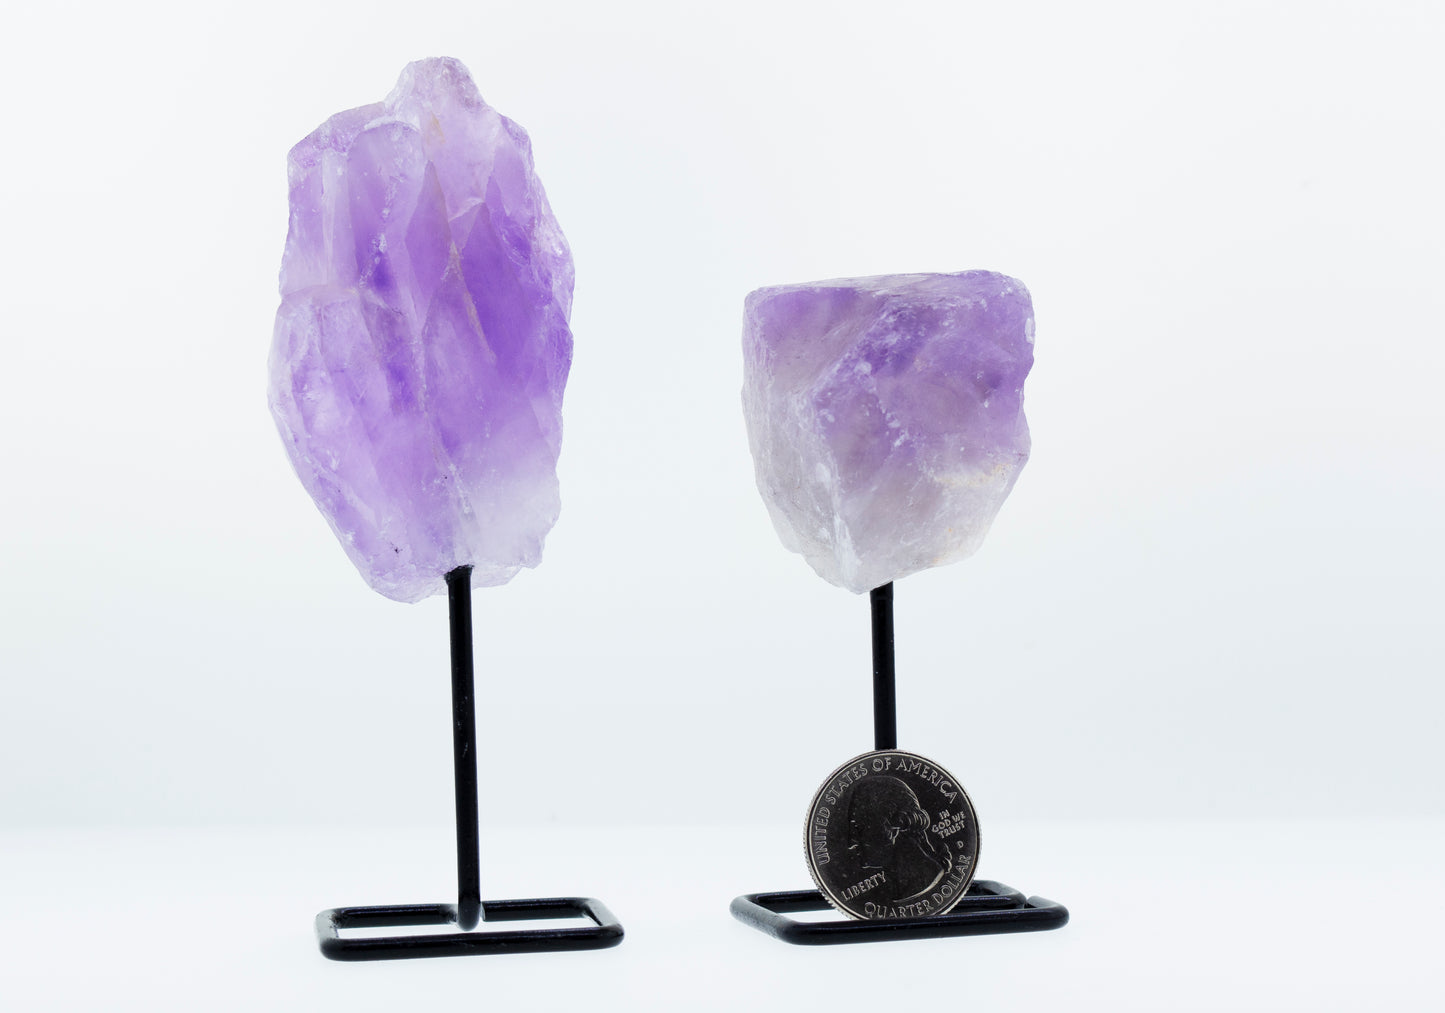 A decorative display featuring an irregular shaped stone with stand on a stylish stand.